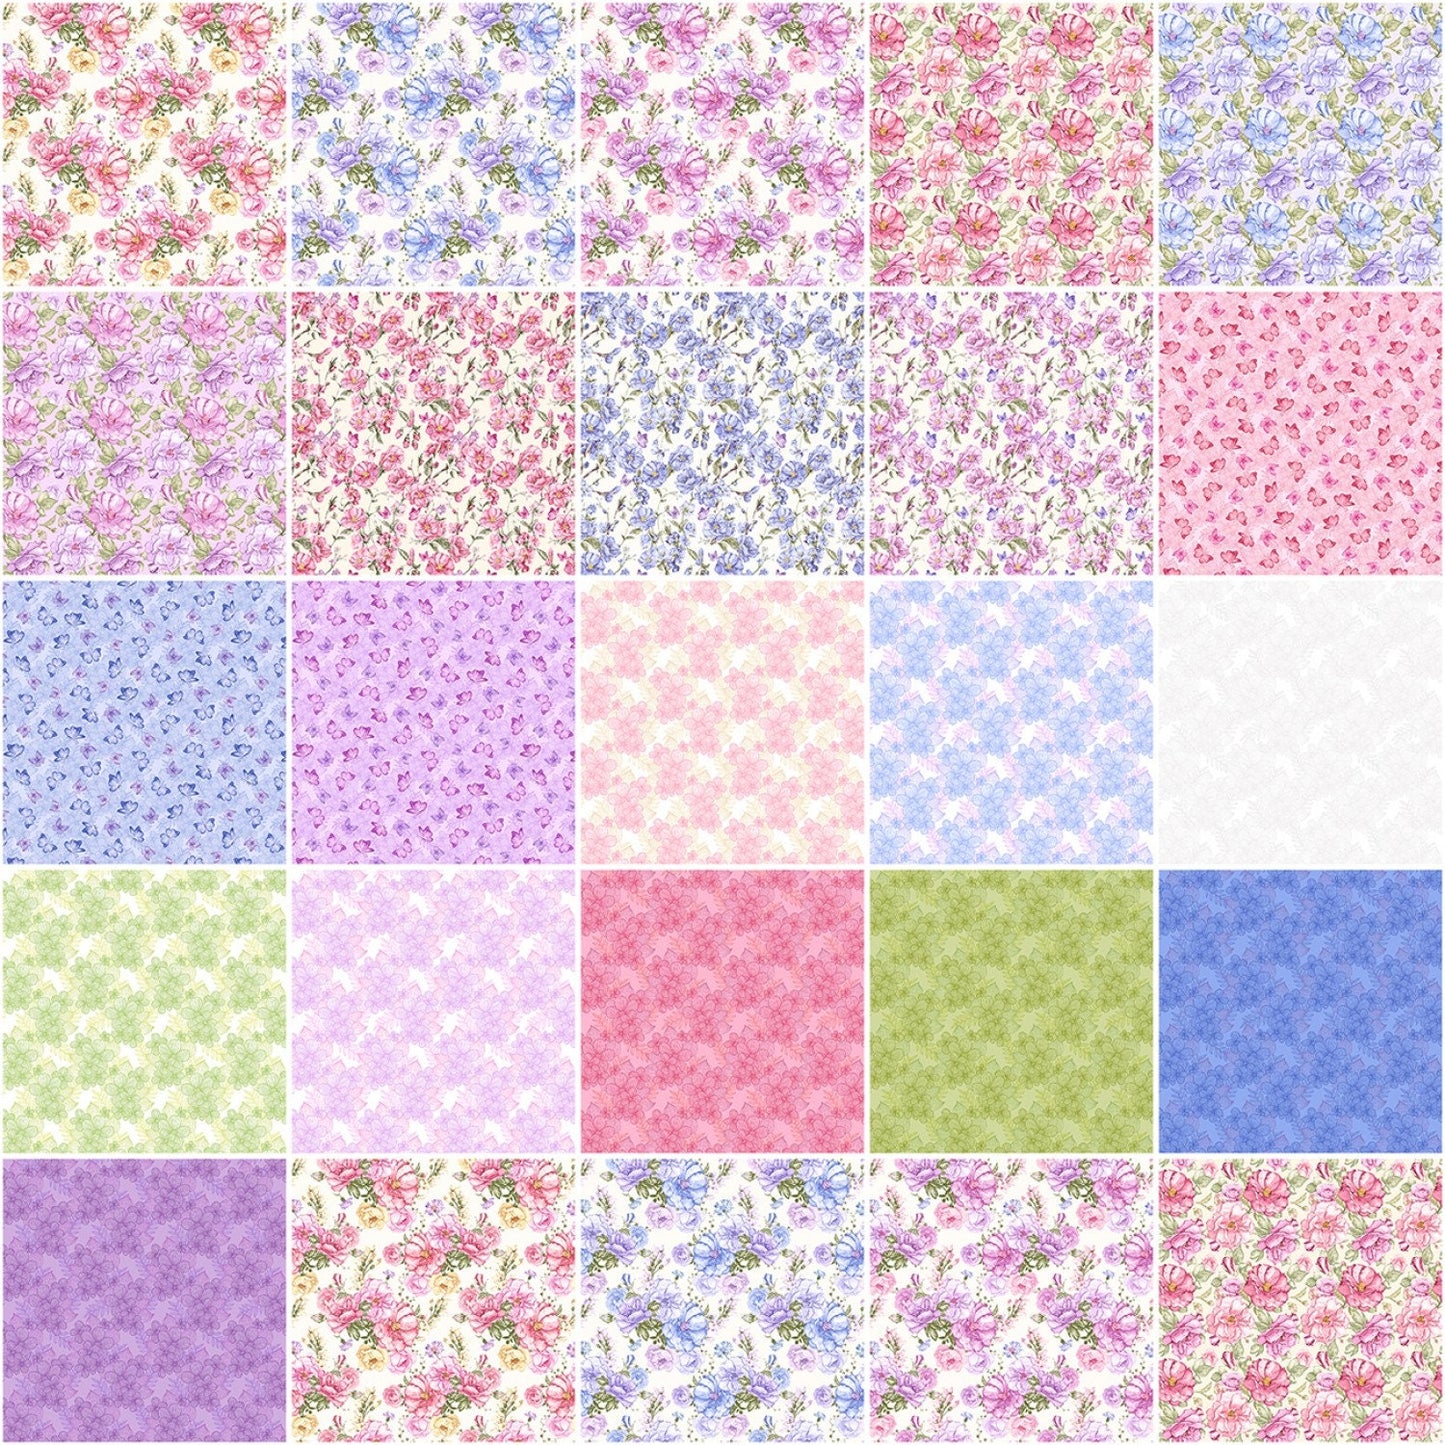 Judy's Bloom - Floral Fabric Squares, Charm Pack, Eleanor Burns, Pink, Purple, Blue, Green, Benartex, 5 inch squares